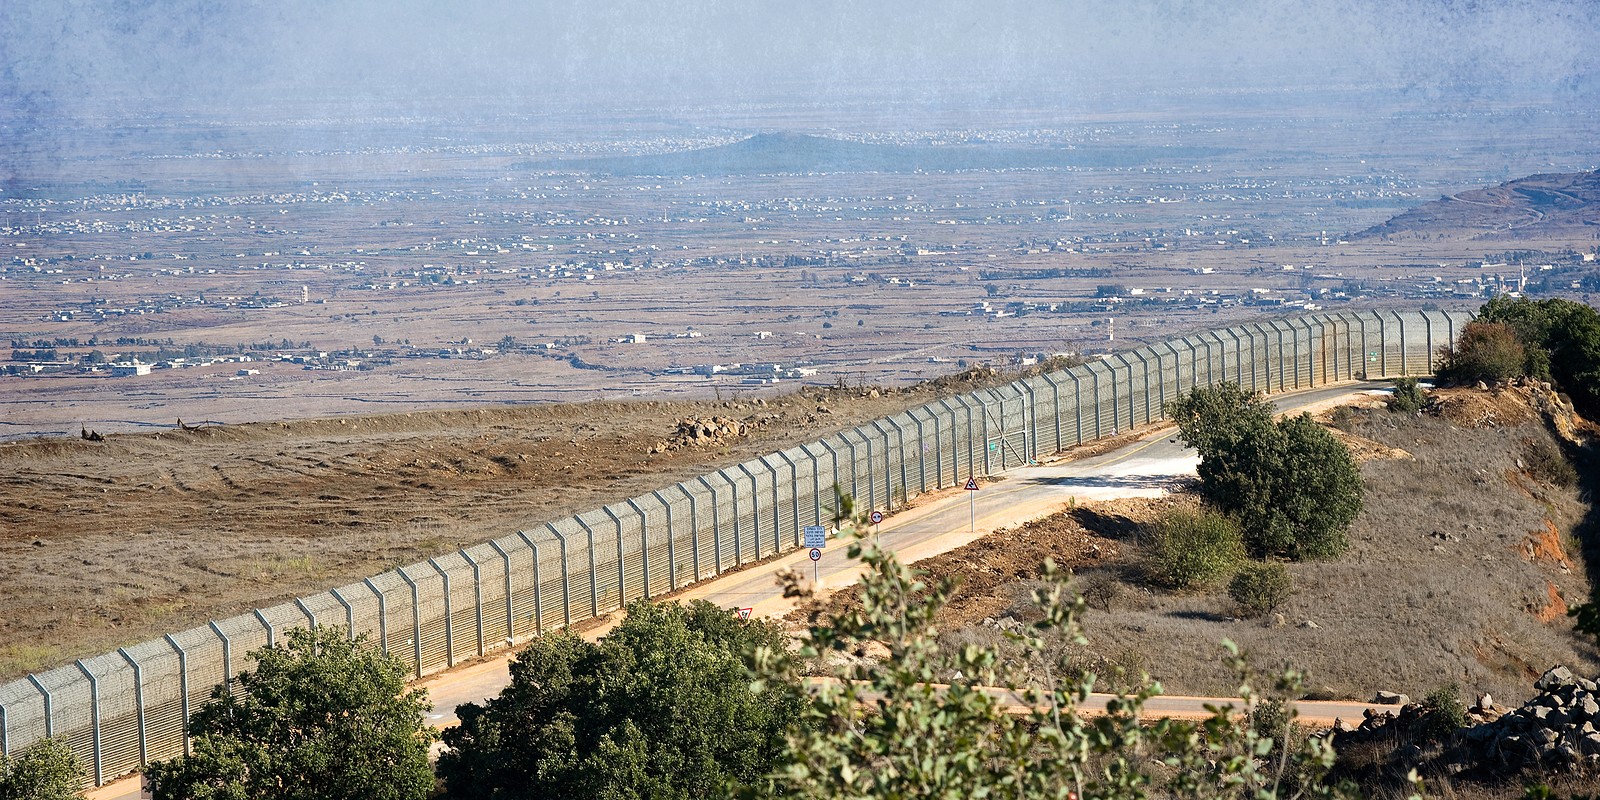 The fence of the border between Israel and Syria as seen from a hill on the Golan Heights about 10 kilometers south/south-east of the city Al Quneitra